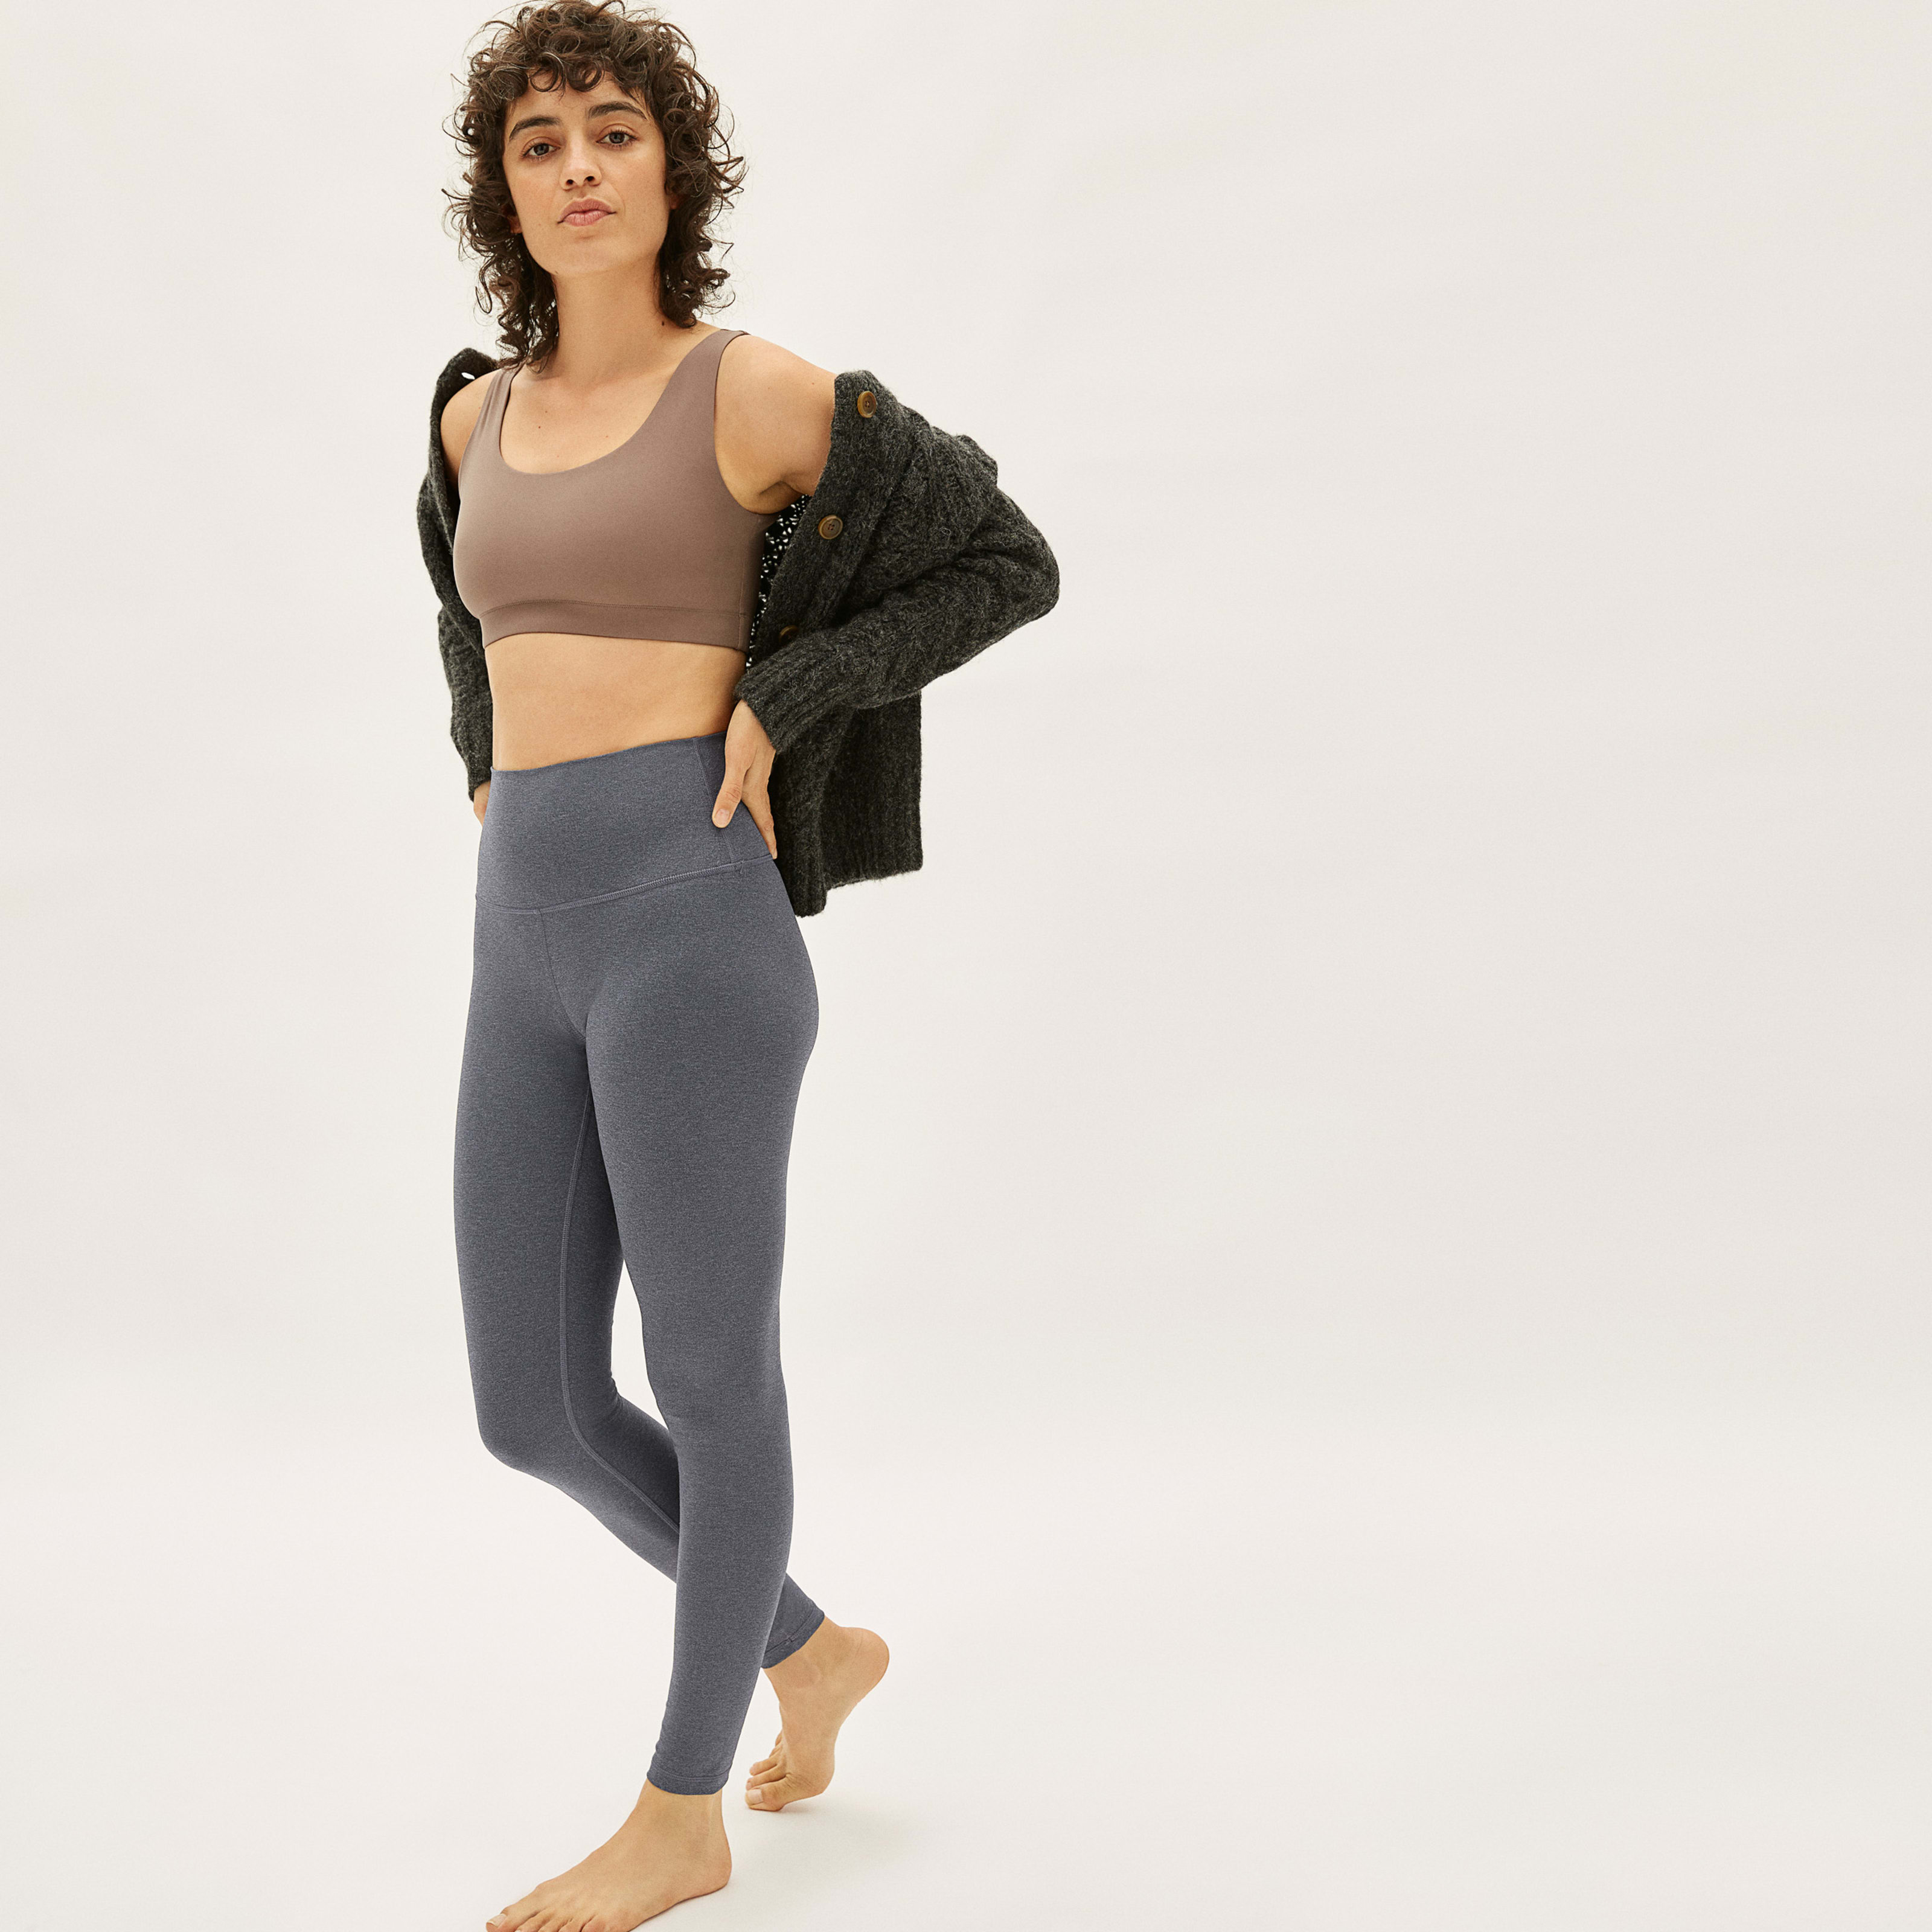 Women's Perform Legging by Everlane in Heathered Charcoal, Size XXXL